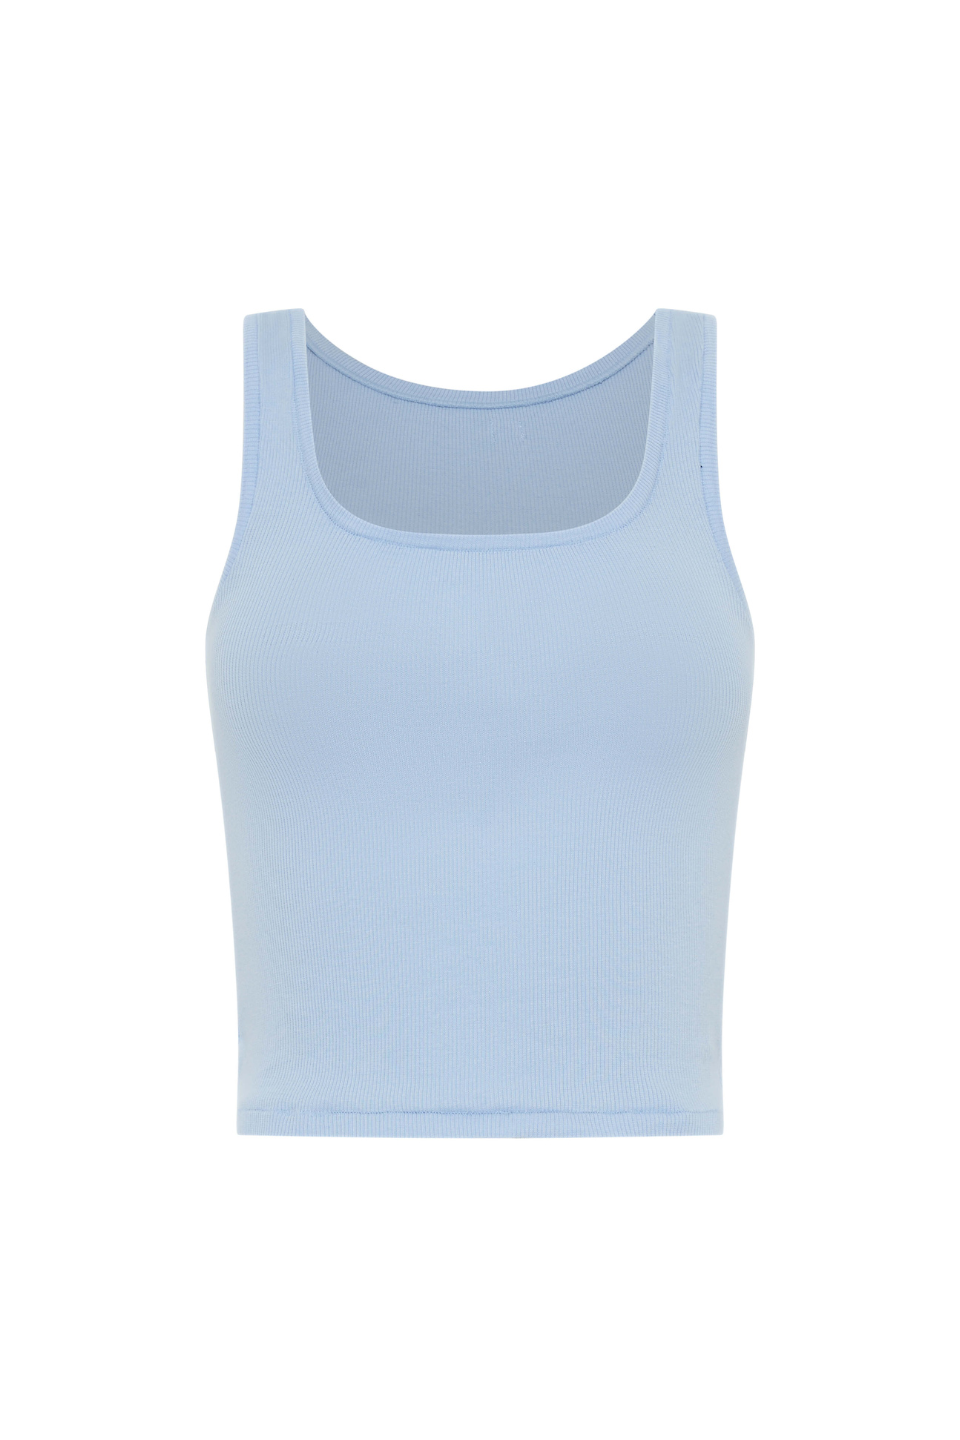 The Ribbed Tank, Bras - First Thing Underwear